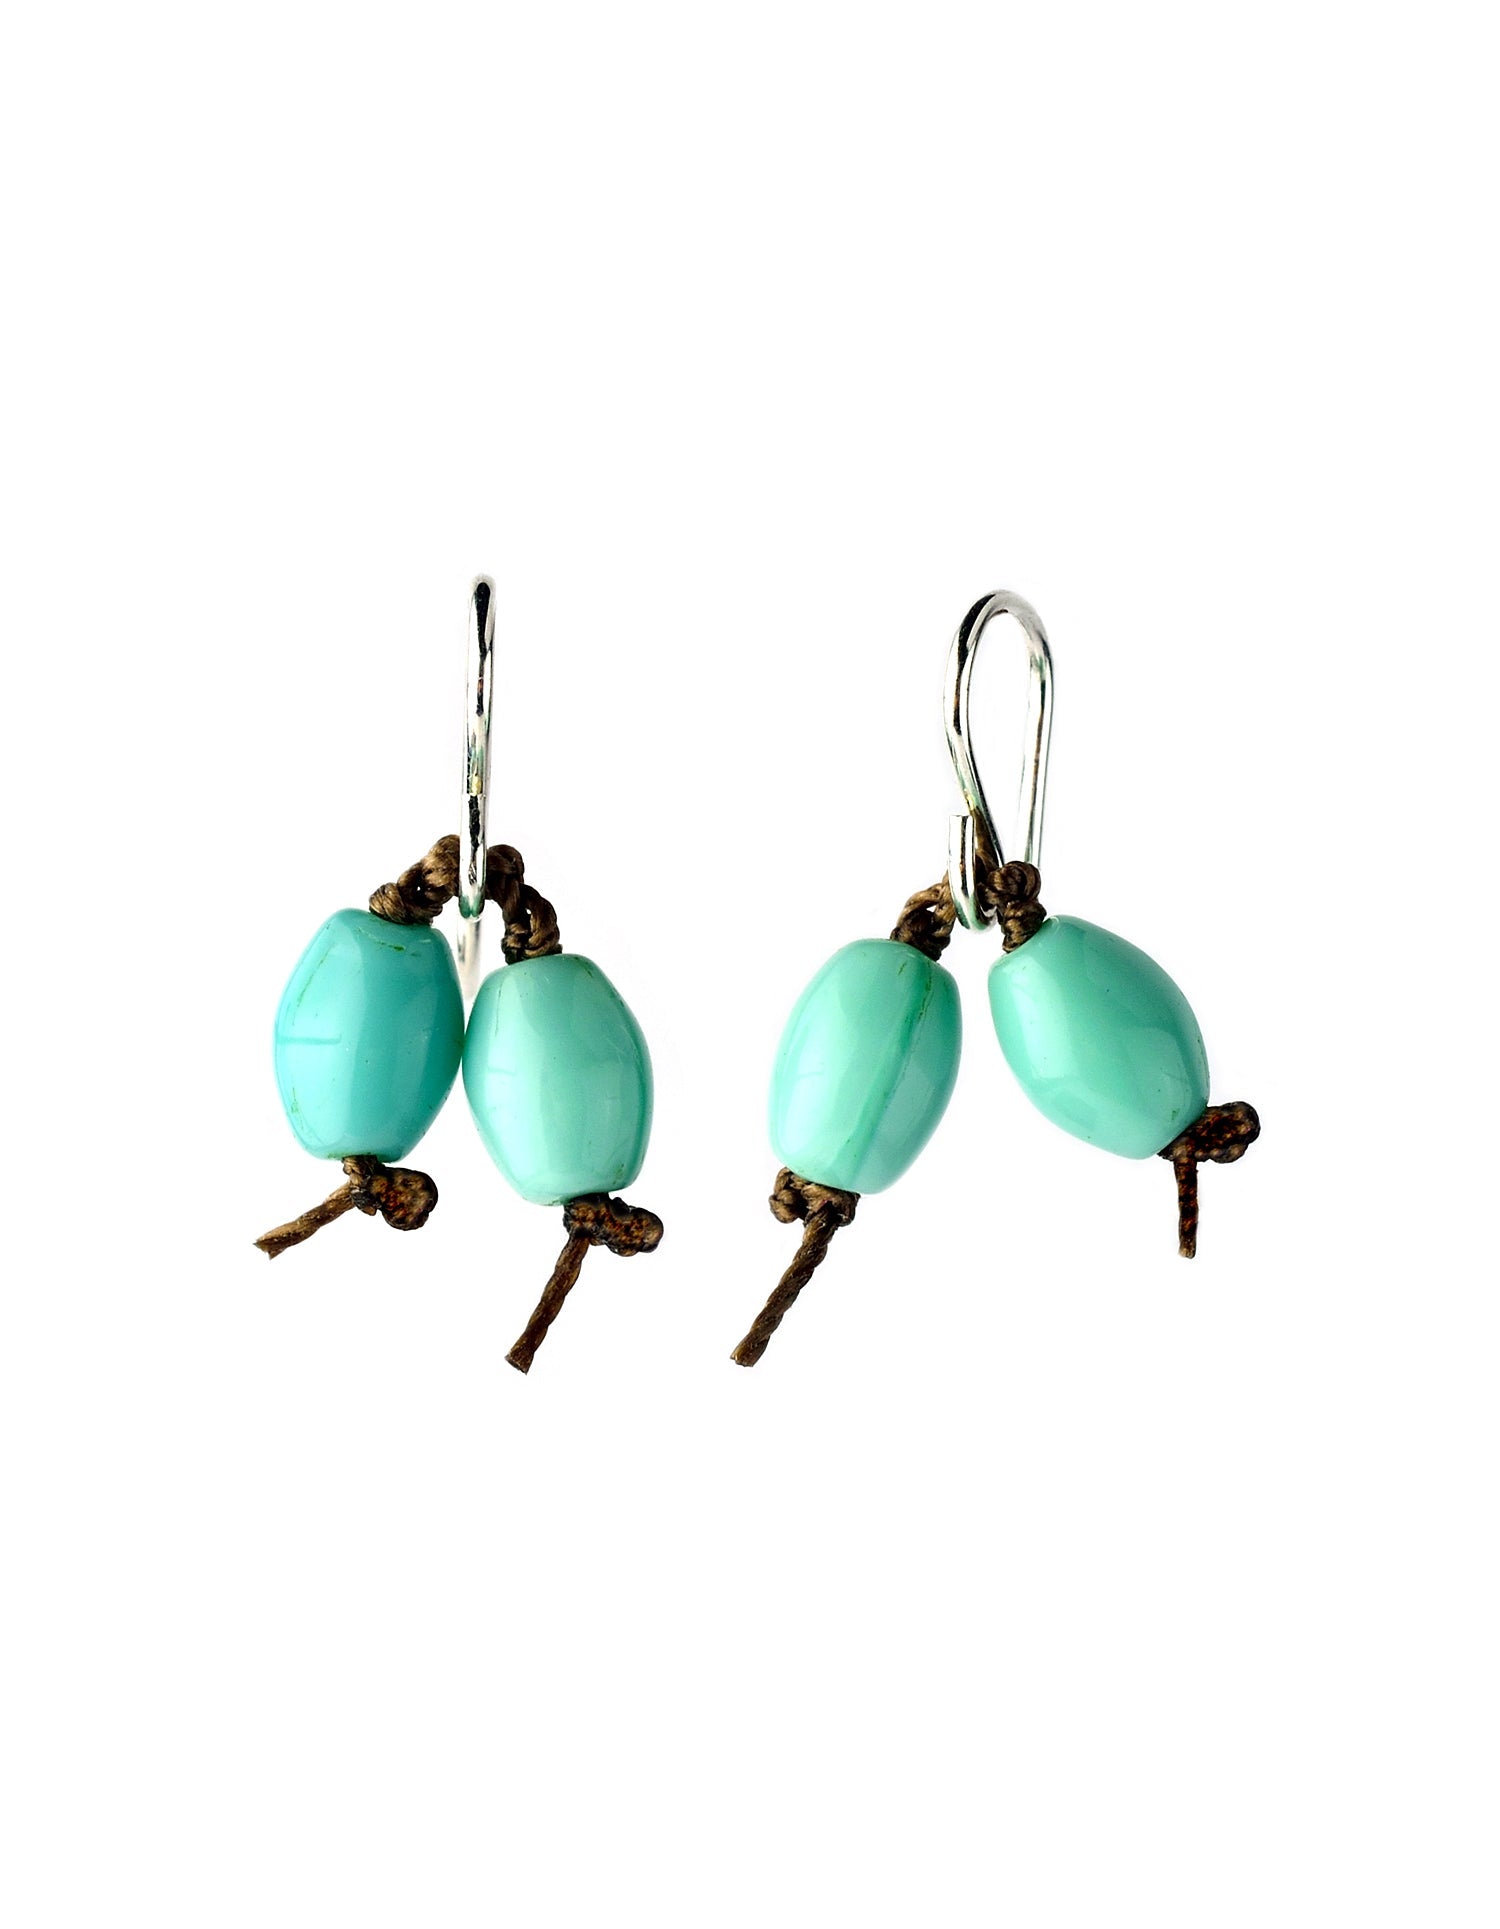 Bonbons - 5 Options - by On U Jewelry